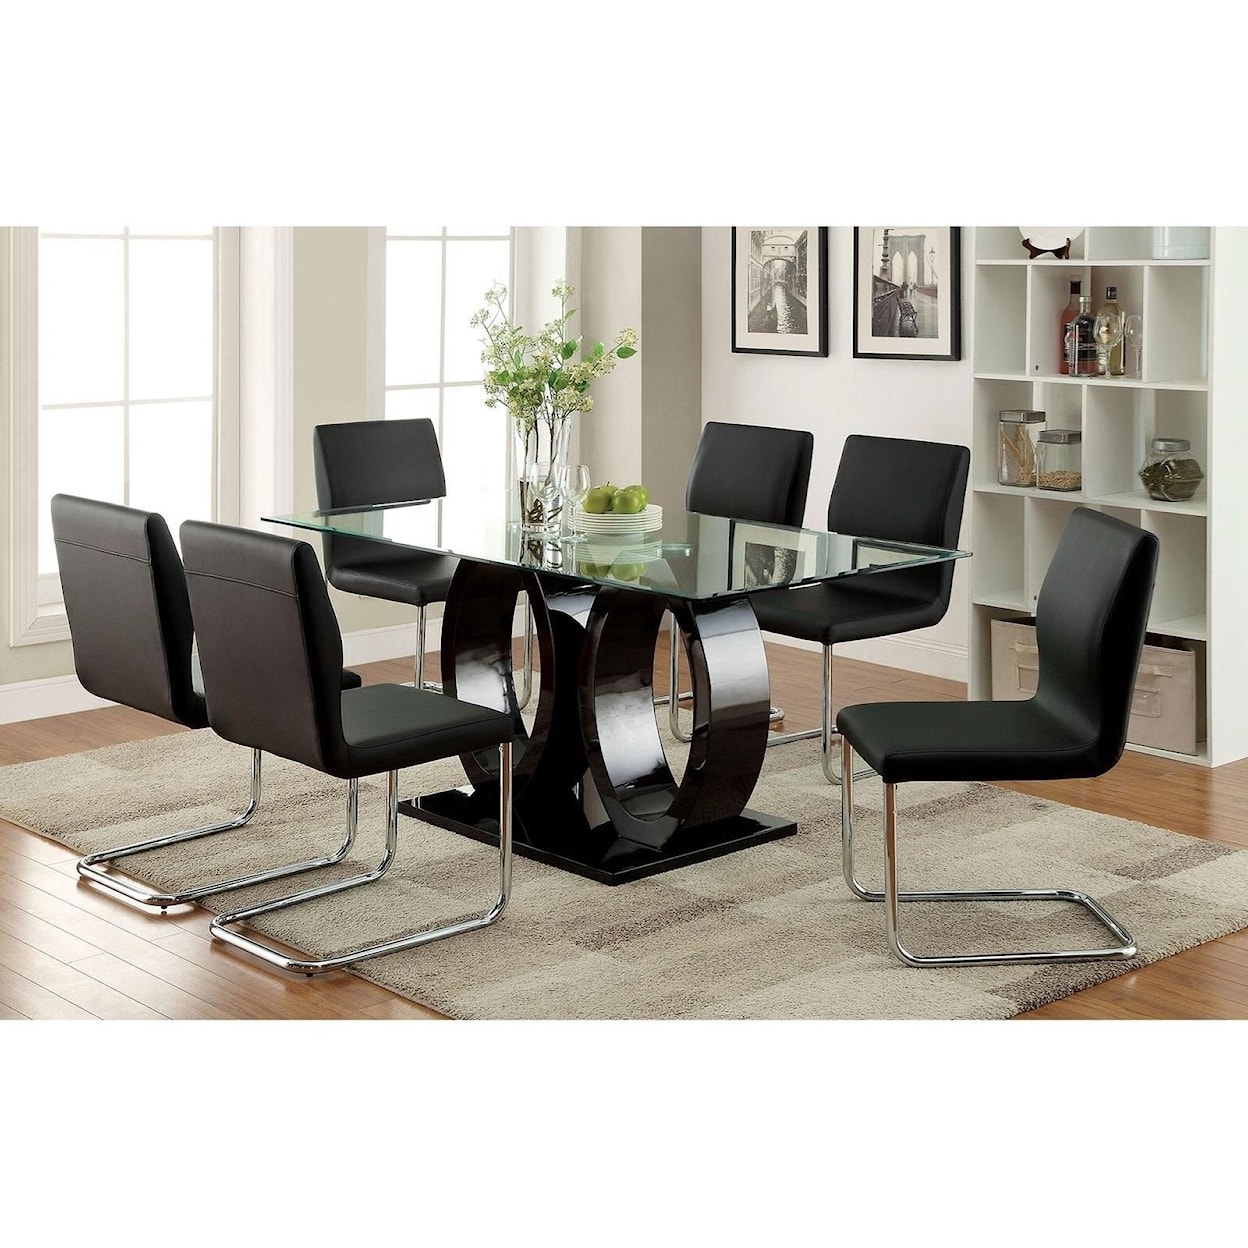 FUSA Lodia I Table and 6 Side Chairs